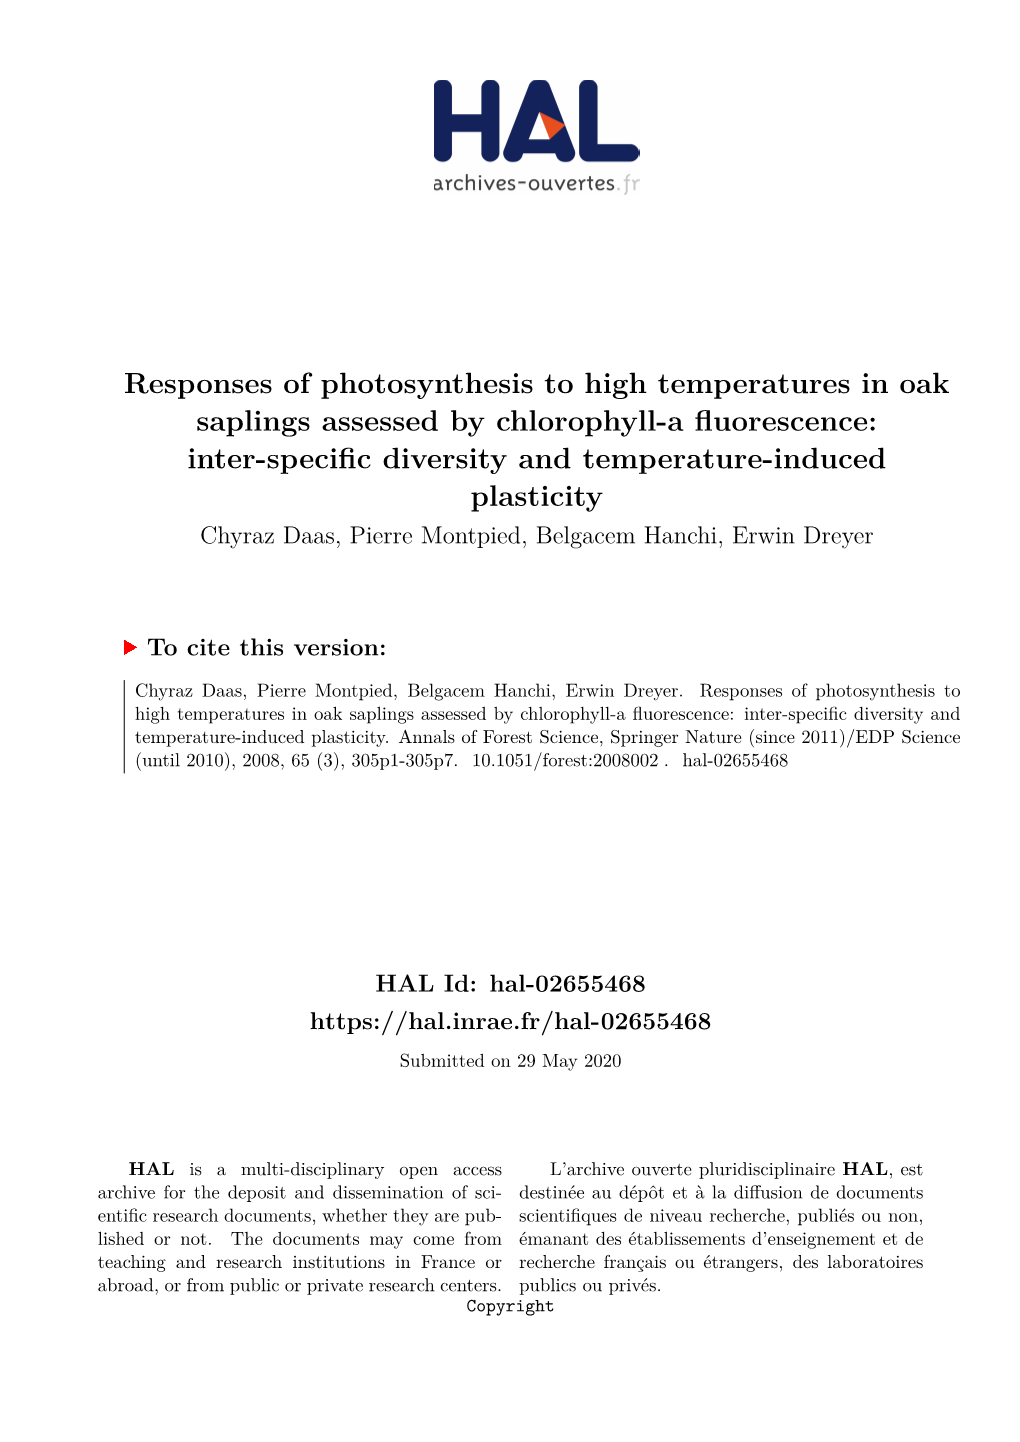 Responses of Photosynthesis to High Temperatures in Oak Saplings Assessed by Chlorophyll-A Fluorescence